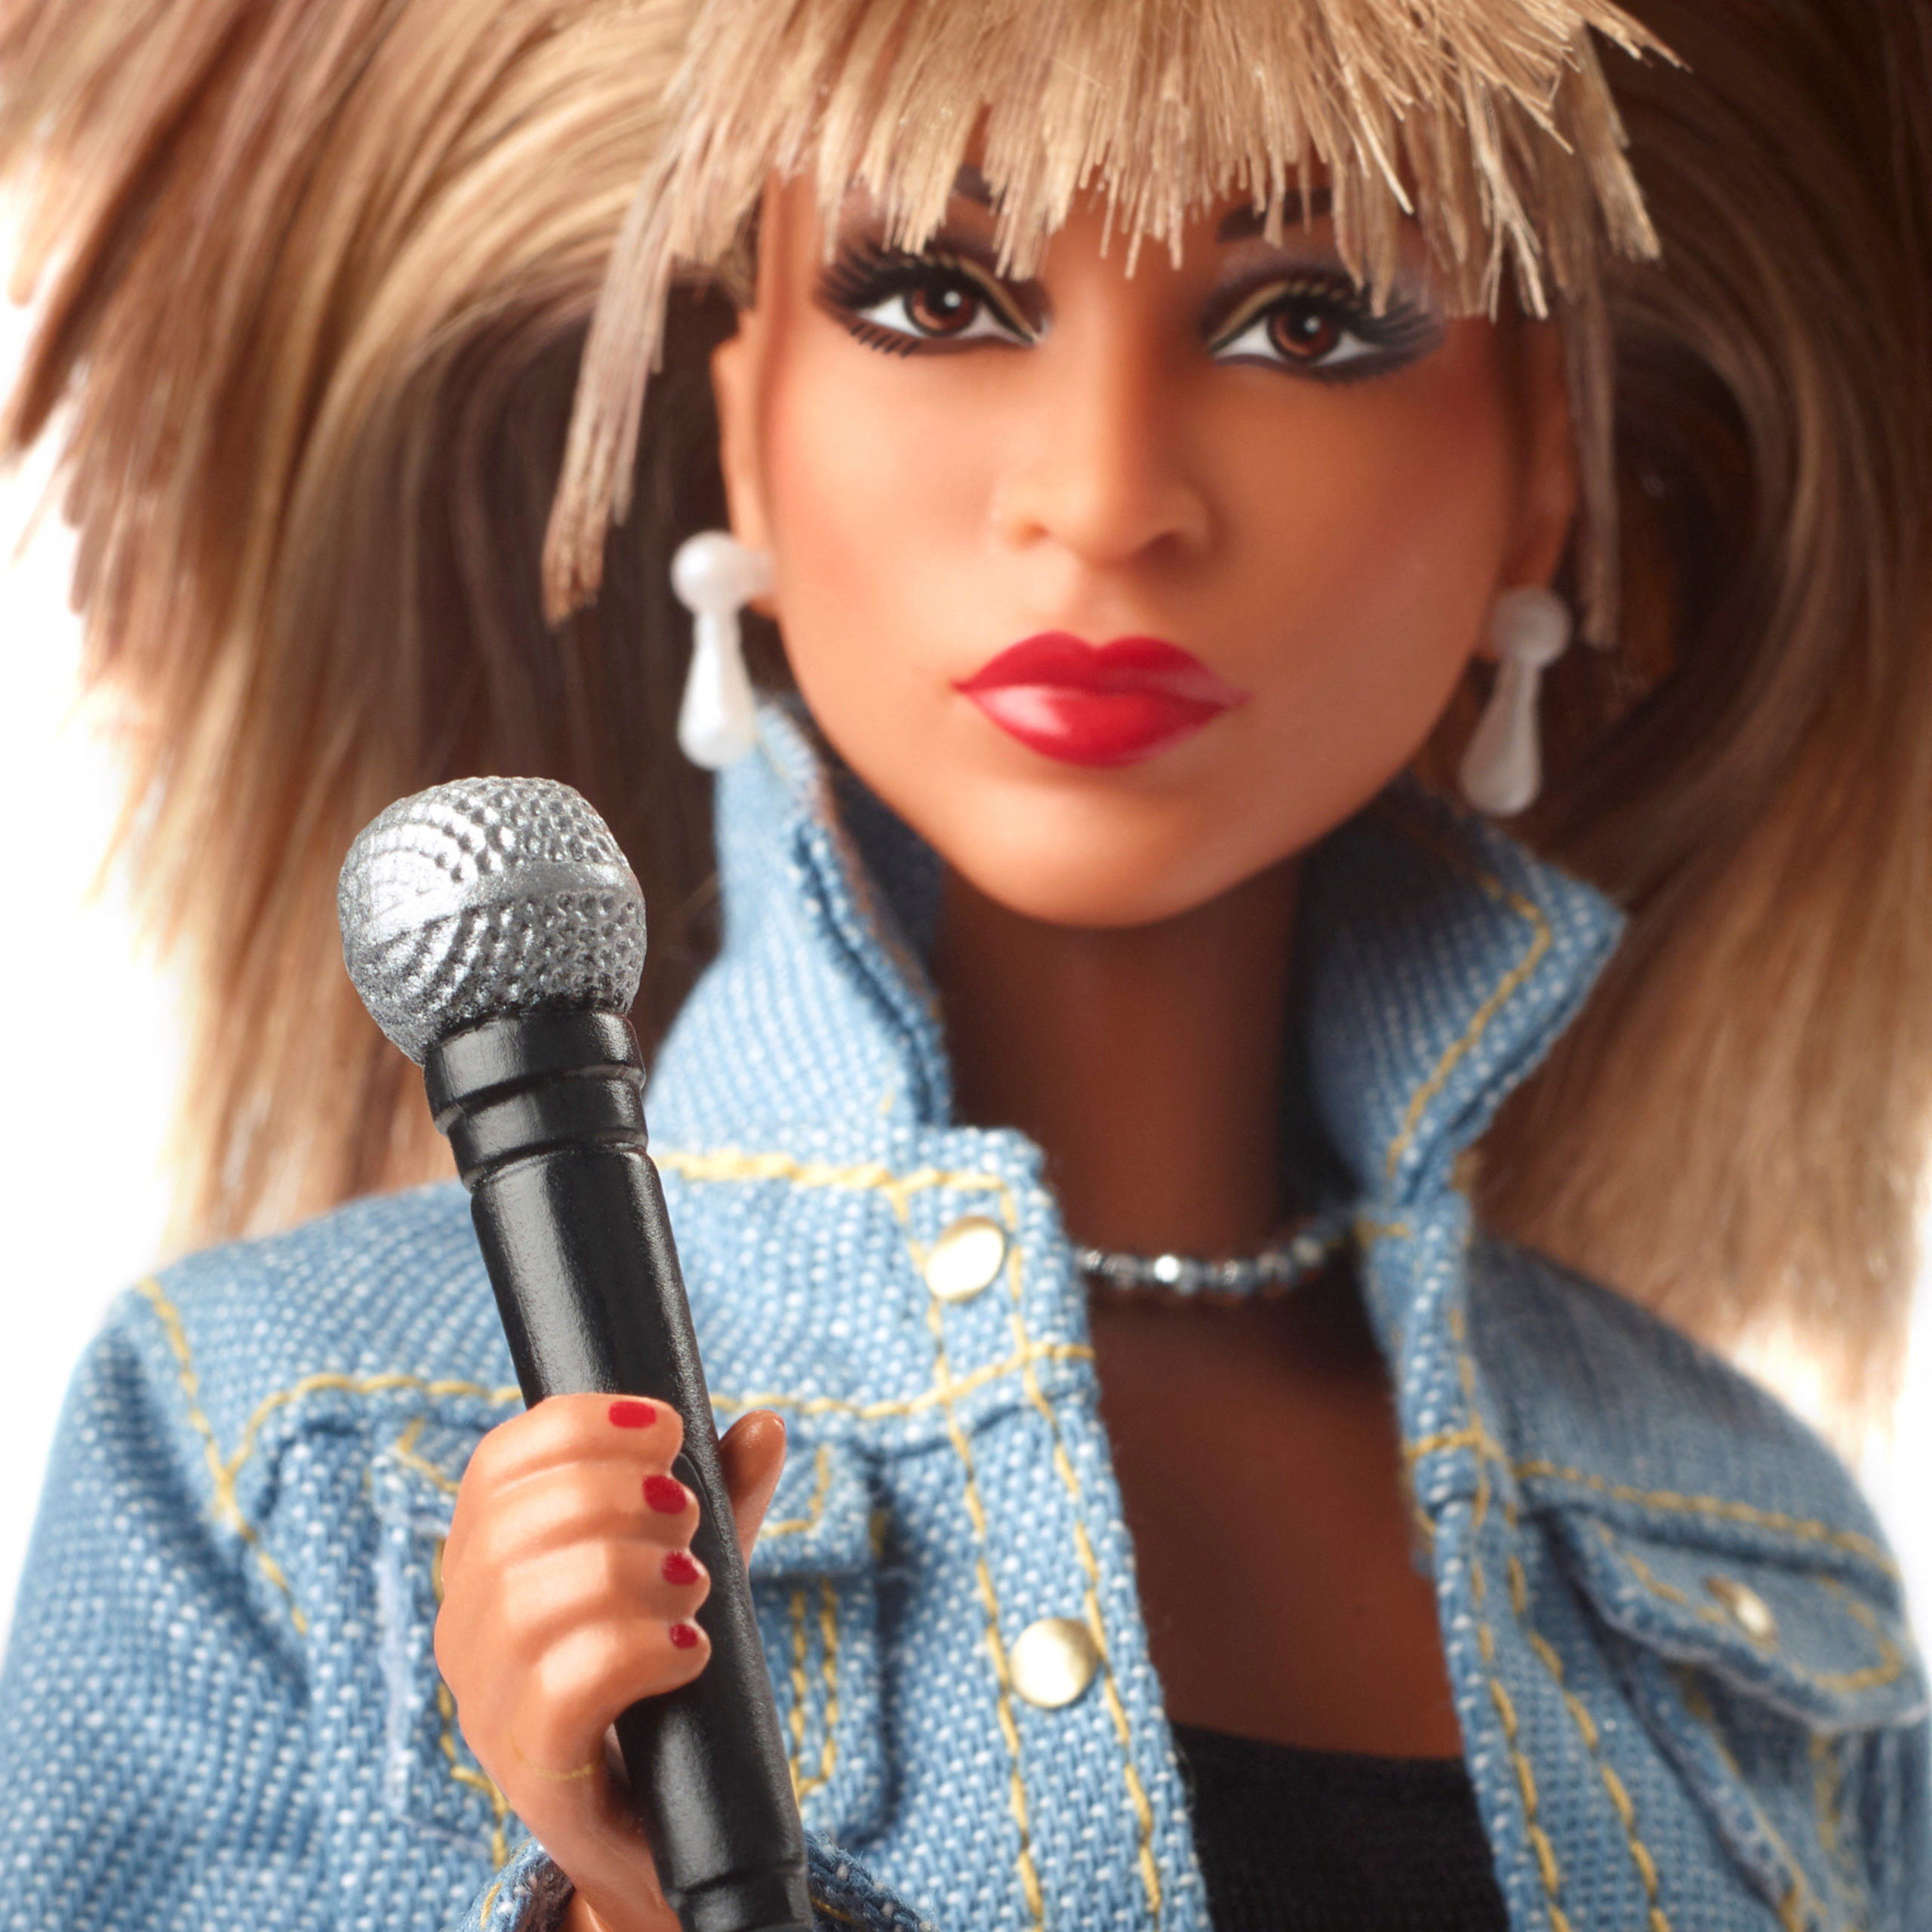 Mattel is honoring Tina Turner on the 40th anniversary of her hit song "What's Love Got To Do With It" with a Barbie doll.